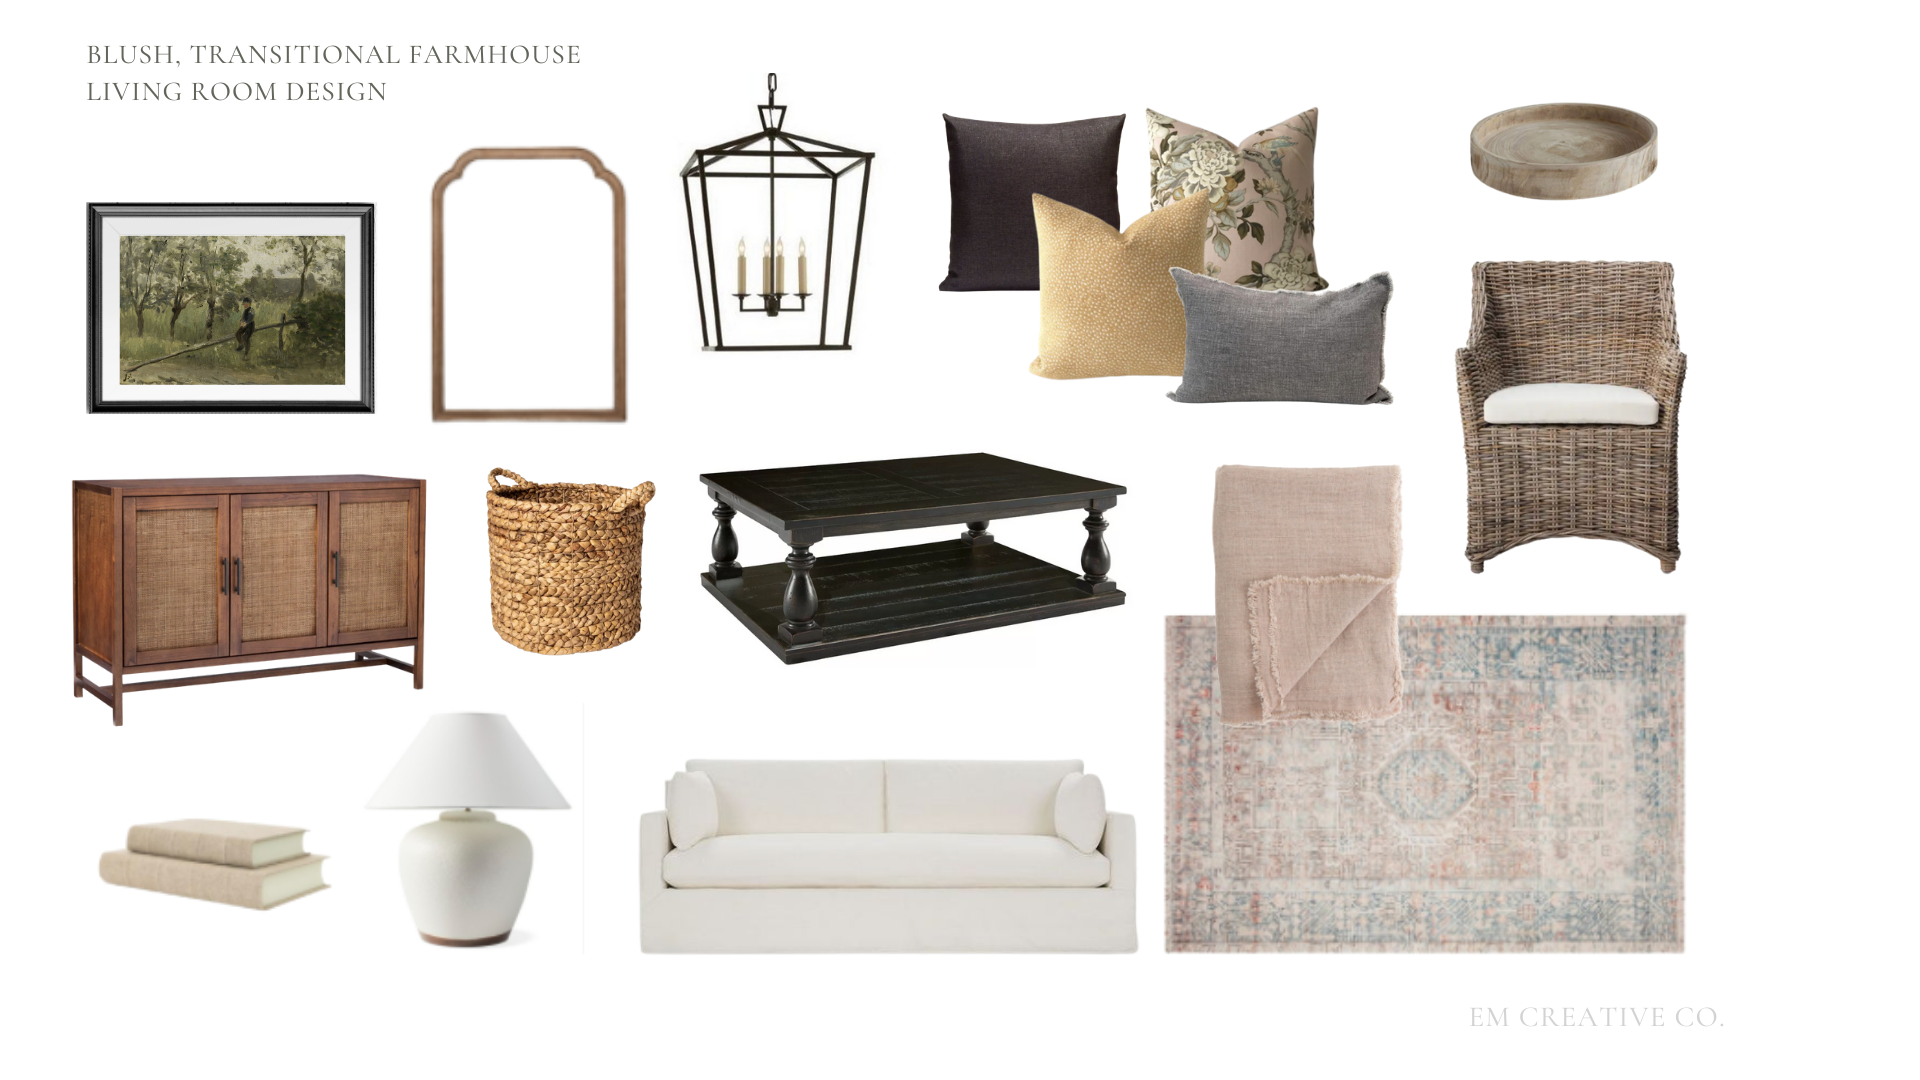 Farmhouse Living Room Design Moodboard with a Wrought Iron Lantern Modern White Sofa and Traditional Vintage Style rug with Vintage Landscape art by Virtual Interior Design Company EM Creative Co